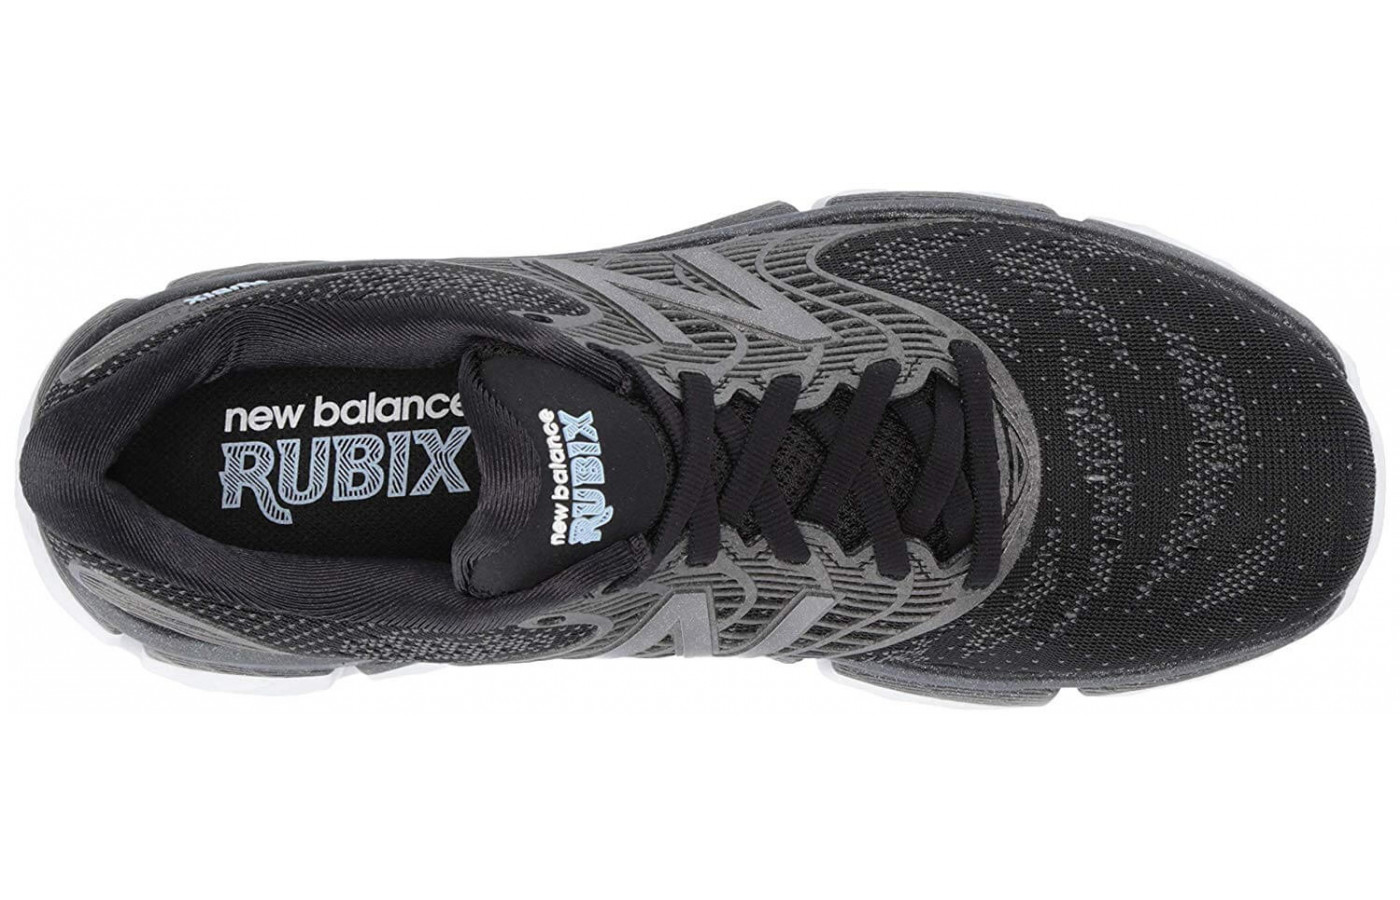 The Rubix features a Double Jacquard mesh upper with TPU overlays